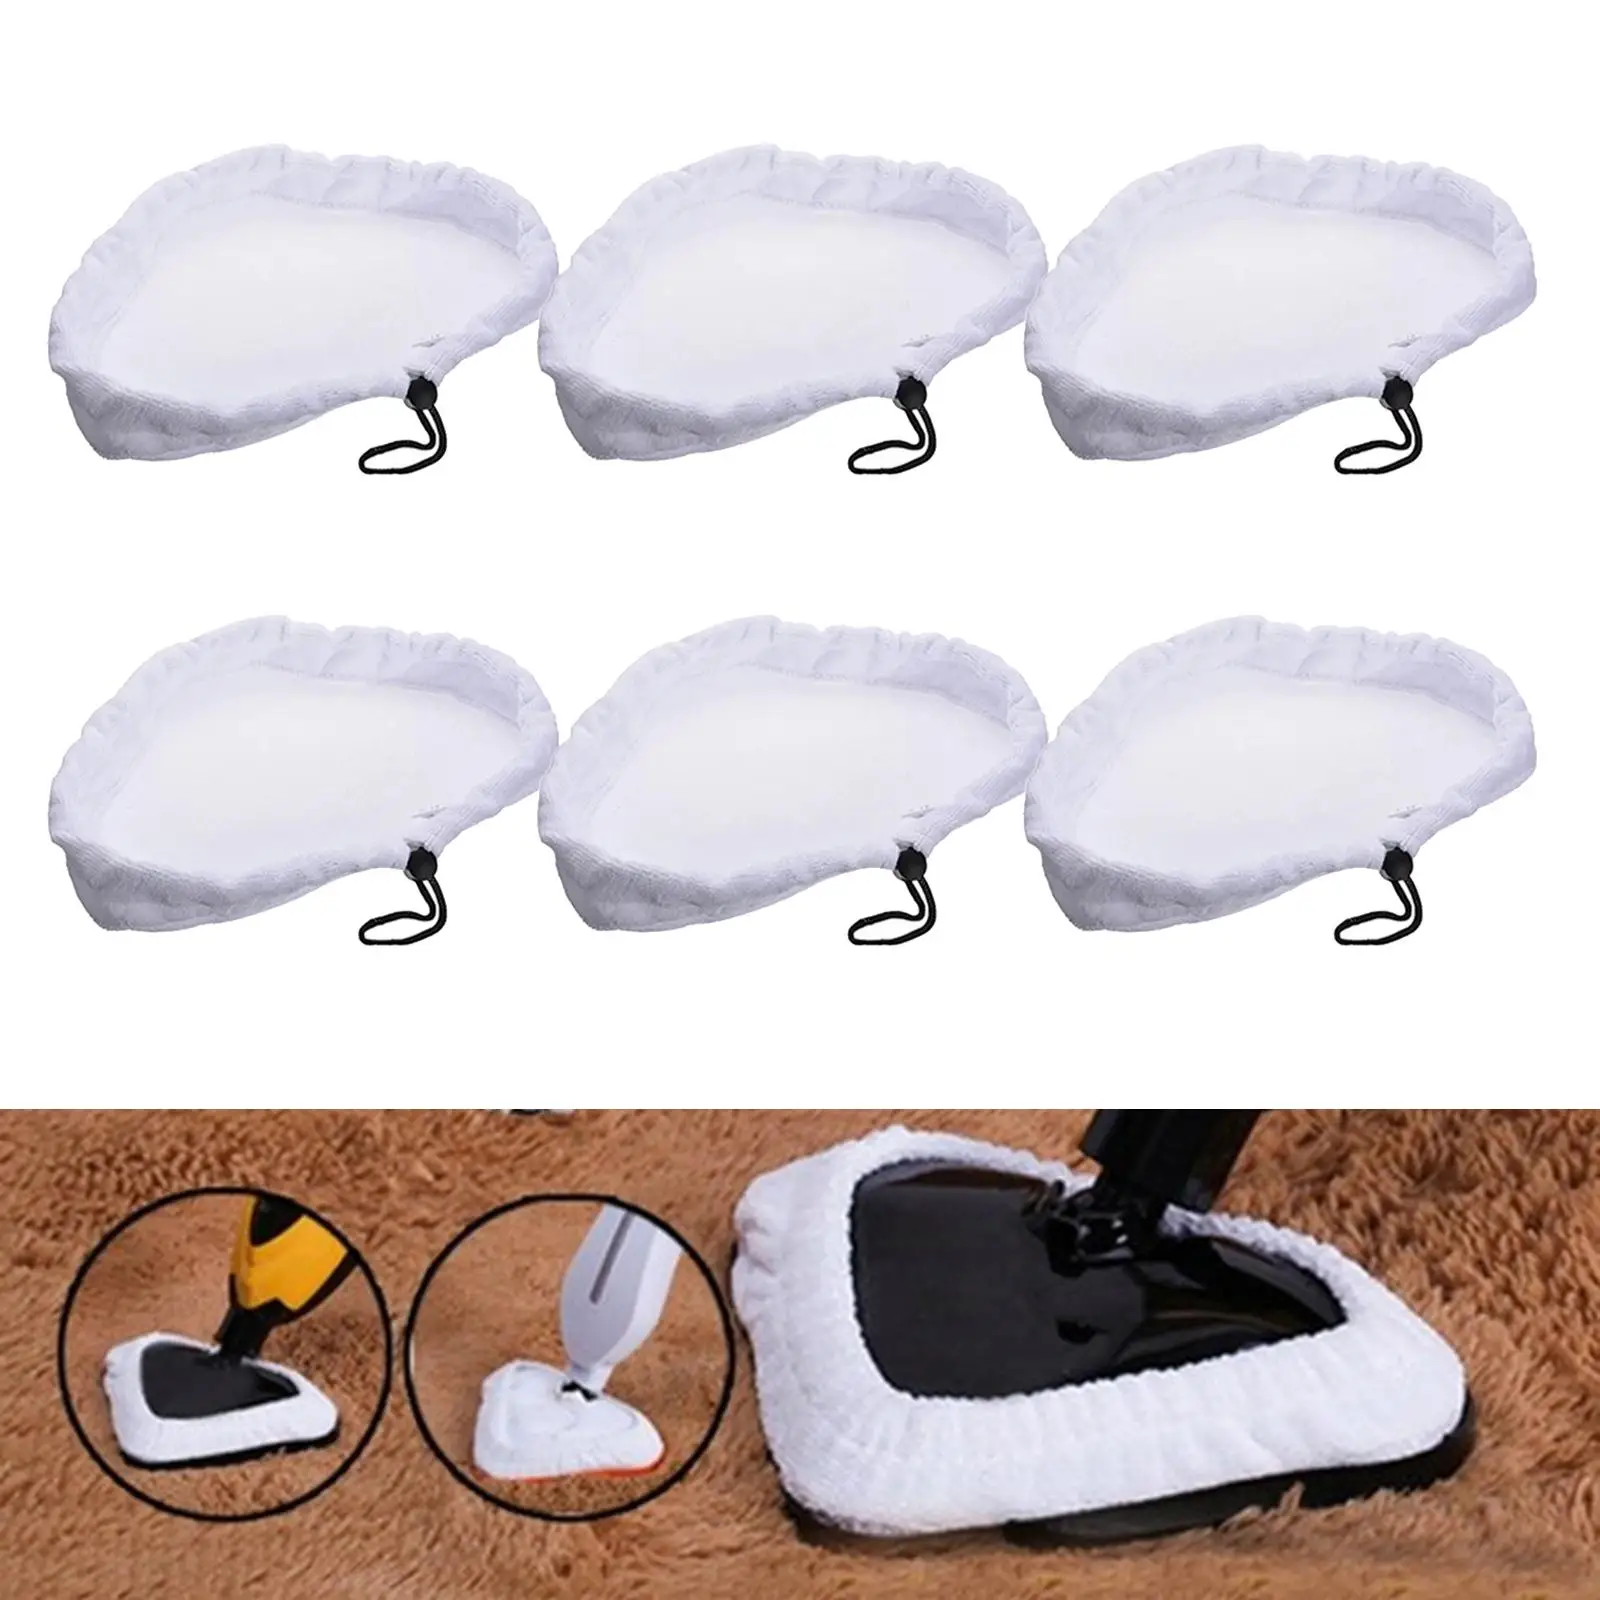 

6Pcs Fiber Home Clean Steam Mop Water Absorbent Reusable Washable Durable for x5 S302 S001 Steam Mop Accessories